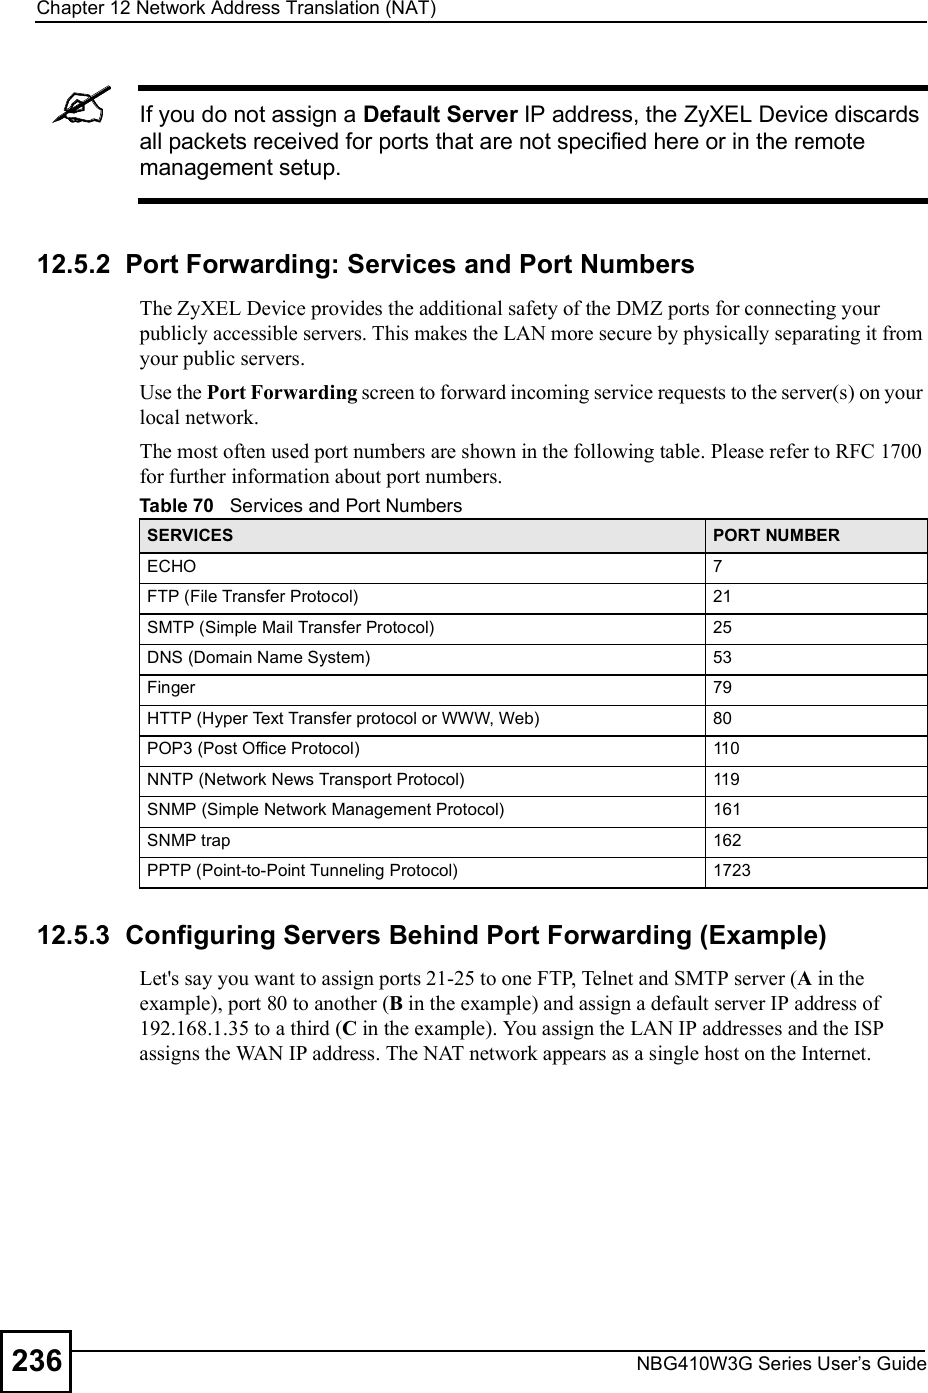 Chapter 12Network Address Translation (NAT)NBG410W3G Series User s Guide236If you do not assign a Default Server IP address, the ZyXEL Device discards all packets received for ports that are not specified here or in the remote management setup.12.5.2  Port Forwarding: Services and Port NumbersThe ZyXEL Device provides the additional safety of the DMZ ports for connecting your publicly accessible servers. This makes the LAN more secure by physically separating it from your public servers. Use the Port Forwarding screen to forward incoming service requests to the server(s) on your local network. The most often used port numbers are shown in the following table. Please refer to RFC 1700 for further information about port numbers. 12.5.3  Configuring Servers Behind Port Forwarding (Example)Let&apos;s say you want to assign ports 21-25 to one FTP, Telnet and SMTP server (A in the example), port 80 to another (B in the example) and assign a default server IP address of 192.168.1.35 to a third (C in the example). You assign the LAN IP addresses and the ISP assigns the WAN IP address. The NAT network appears as a single host on the Internet.Table 70   Services and Port NumbersSERVICES PORT NUMBERECHO 7FTP (File Transfer Protocol) 21SMTP (Simple Mail Transfer Protocol) 25DNS (Domain Name System) 53Finger 79HTTP (Hyper Text Transfer protocol or WWW, Web) 80POP3 (Post Office Protocol) 110NNTP (Network News Transport Protocol) 119SNMP (Simple Network Management Protocol) 161SNMP trap 162PPTP (Point-to-Point Tunneling Protocol) 1723